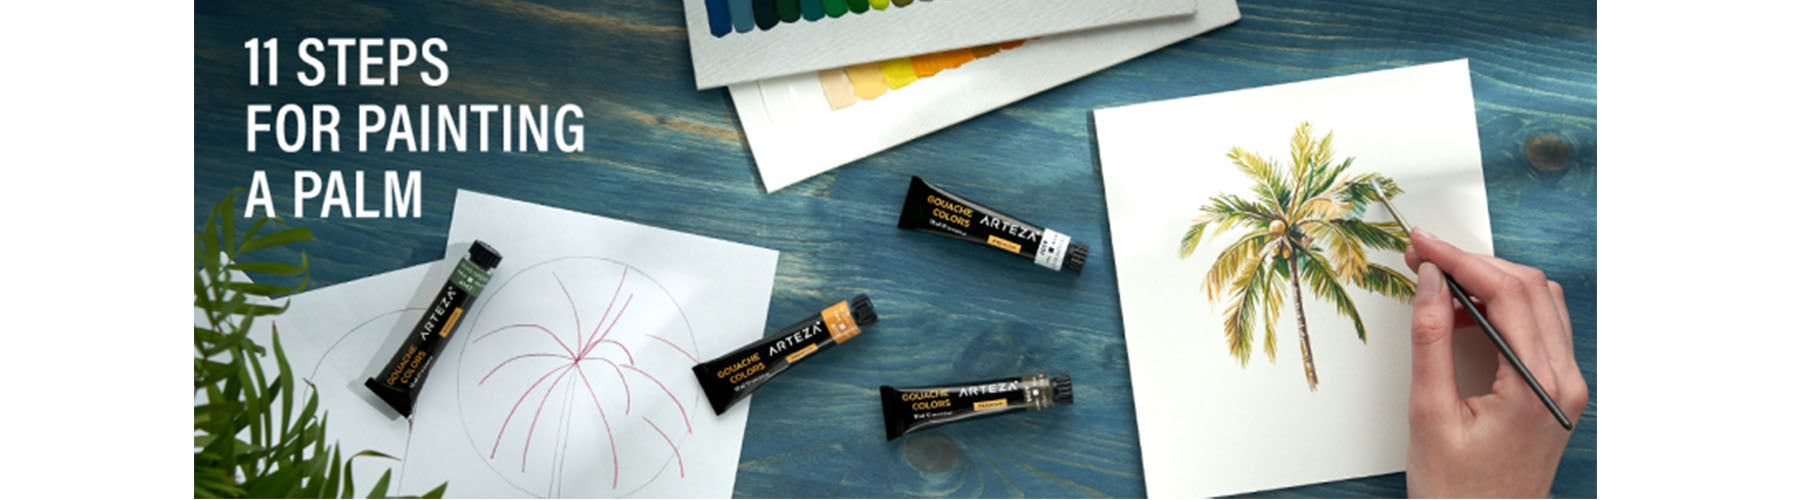 DIY Gouache: A Step-by-Step Guide to Making Your Own Opaque